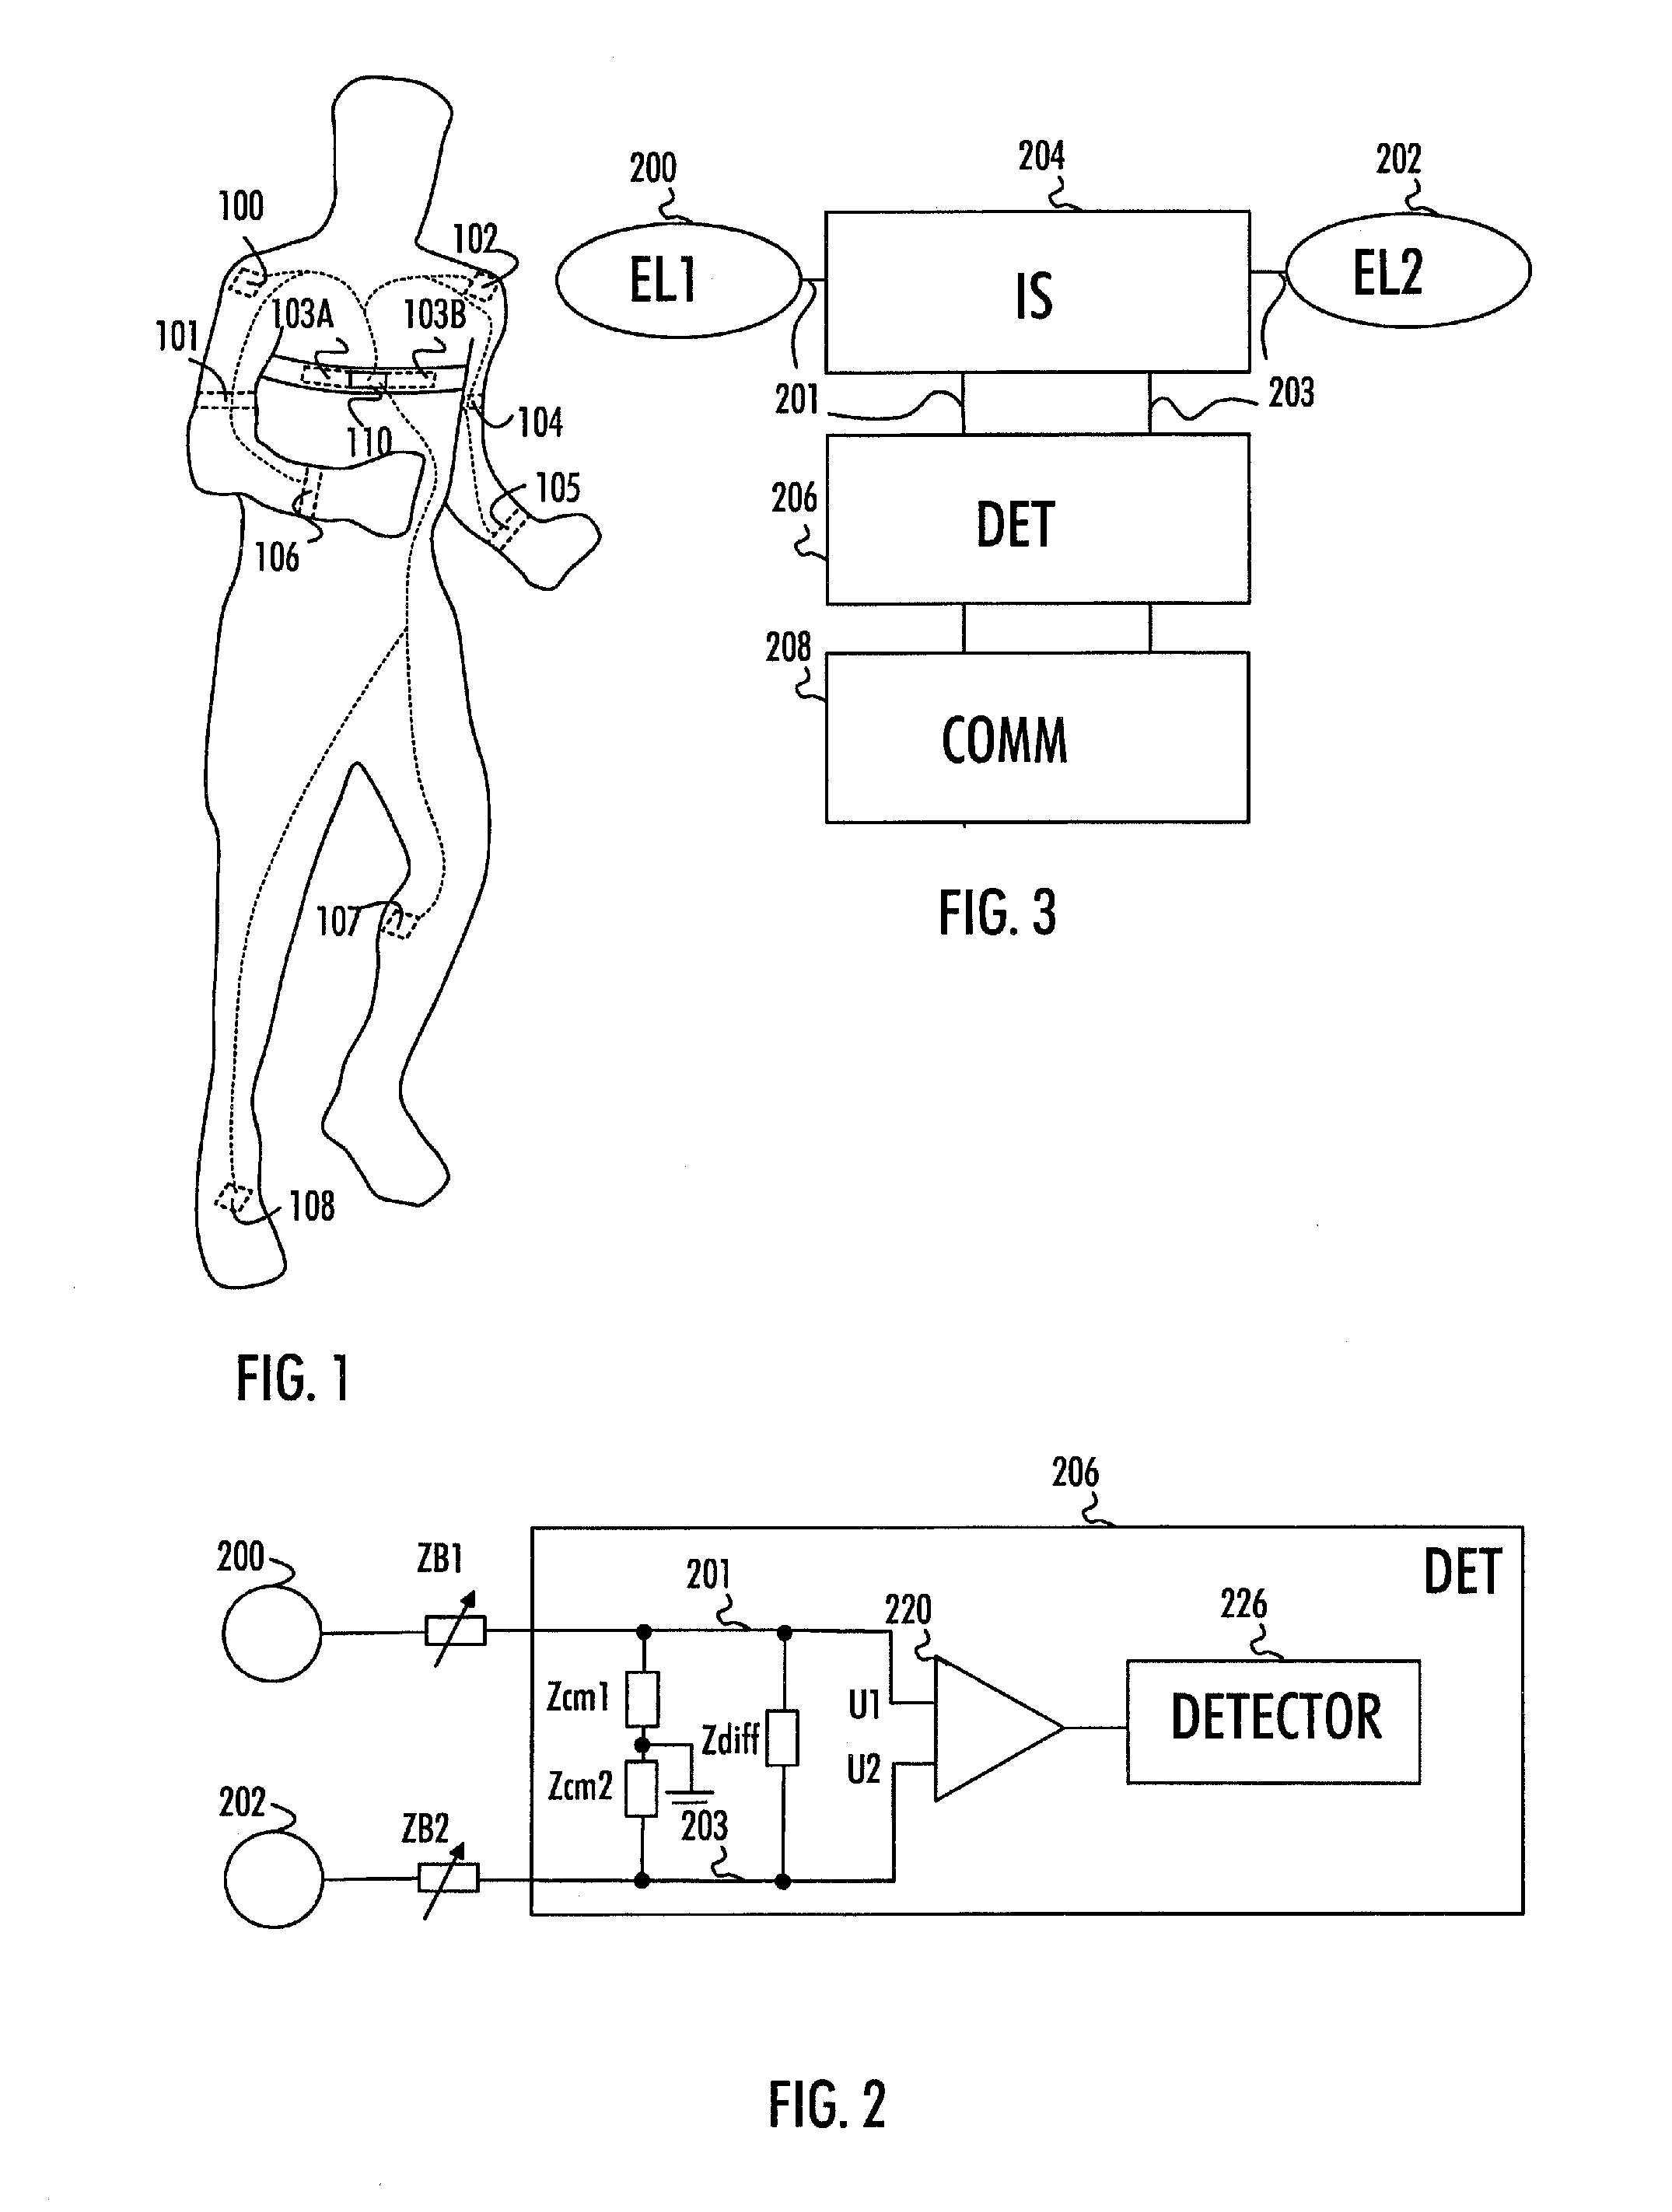 Interference Mitigation Circuitry for Biometric Measurements